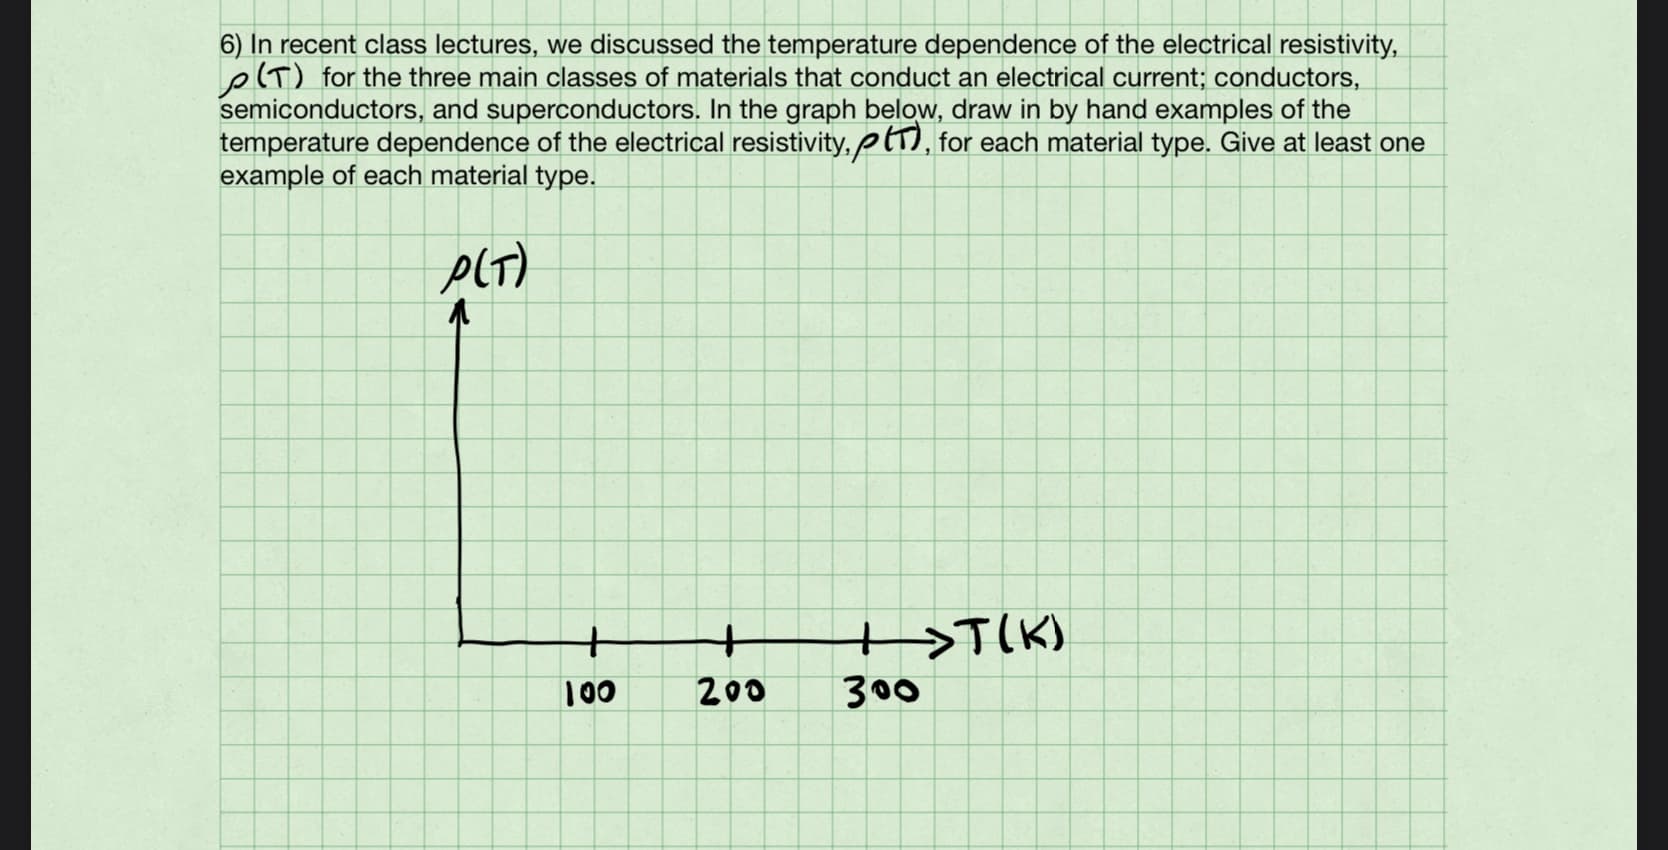 6) In recent class lectures, we discussed the temperature dependence of the electrical resistivity,
p(T) for the three main classes of materials that conduct an electrical current; conductors,
semiconductors, and superconductors. In the graph below, draw in by hand examples of the
temperature dependence of the electrical resistivity, pT), for each material type. Give at least one
example of each material type.
plT)
+
+>T(K)
100
200
300
